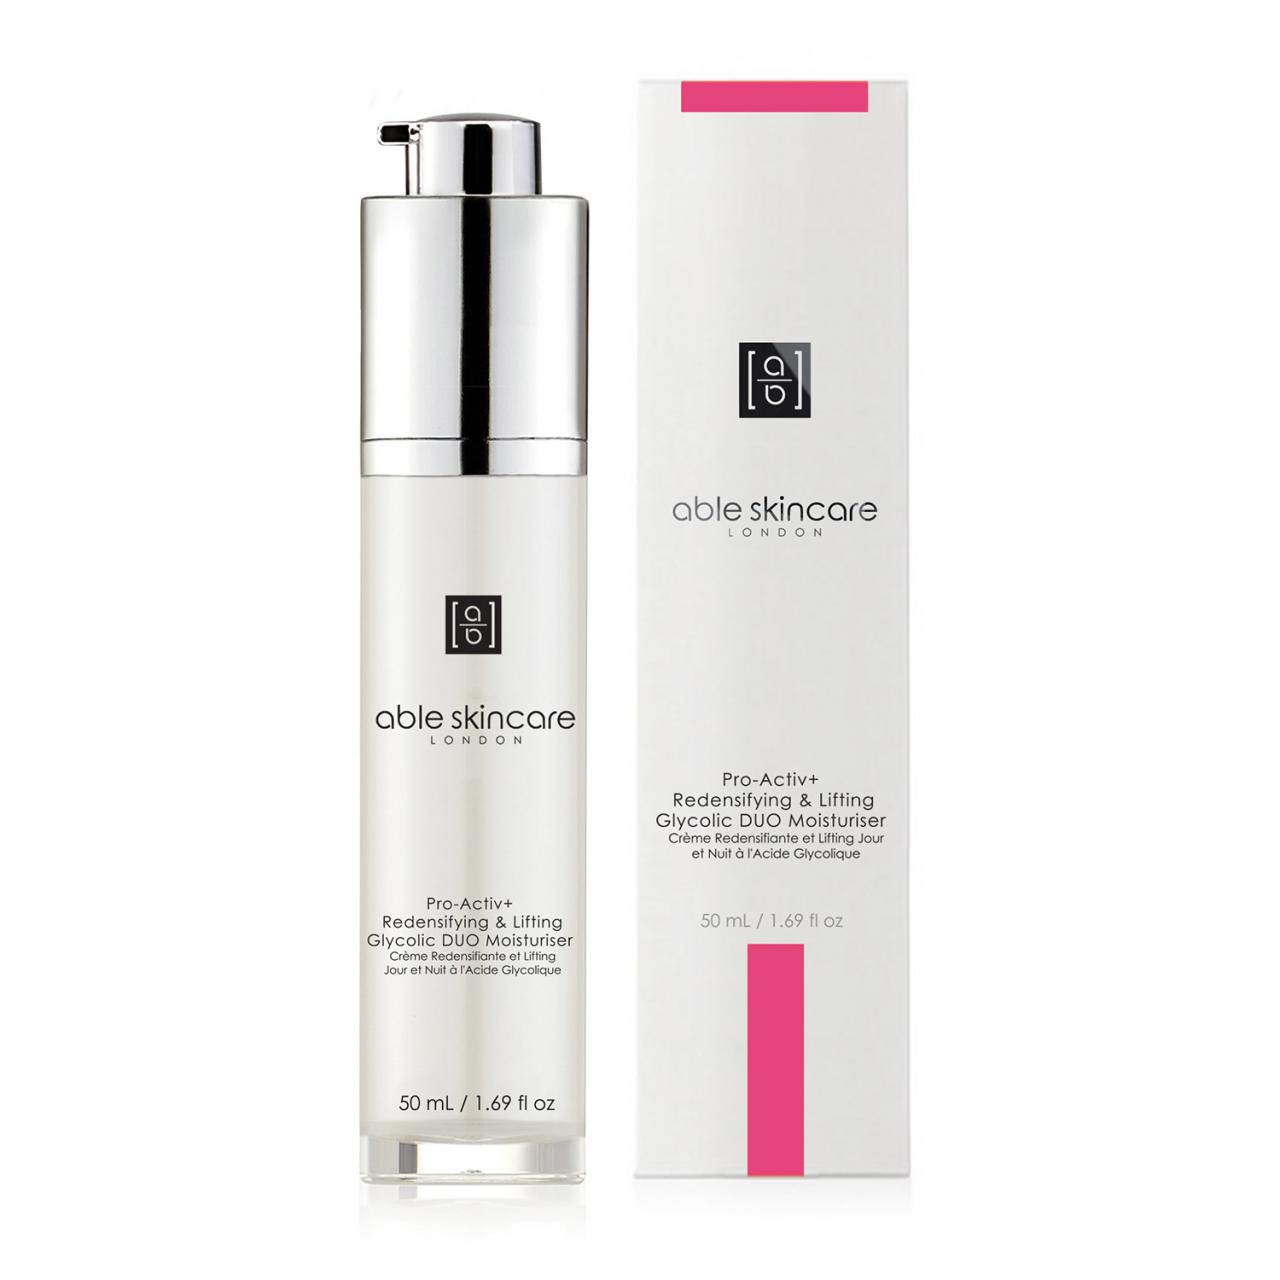 Able Skincare Anti-Aging Duo Moisturizer, Rejuvenate Your Skin with Youthful Radiance